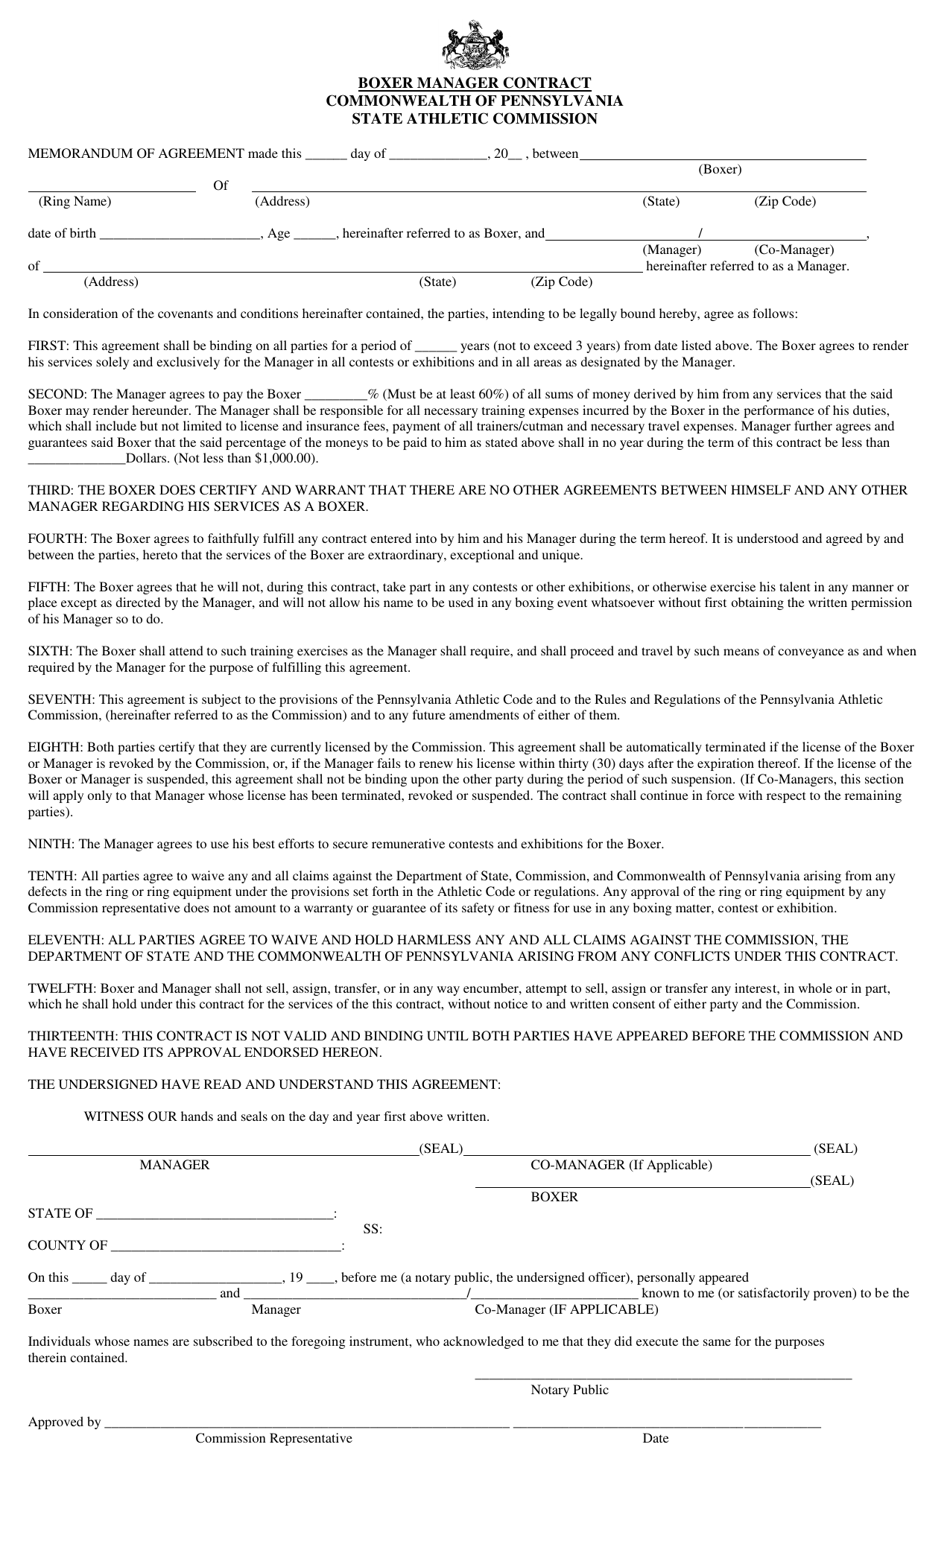 Boxer Manager Contract - Pennsylvania, Page 1